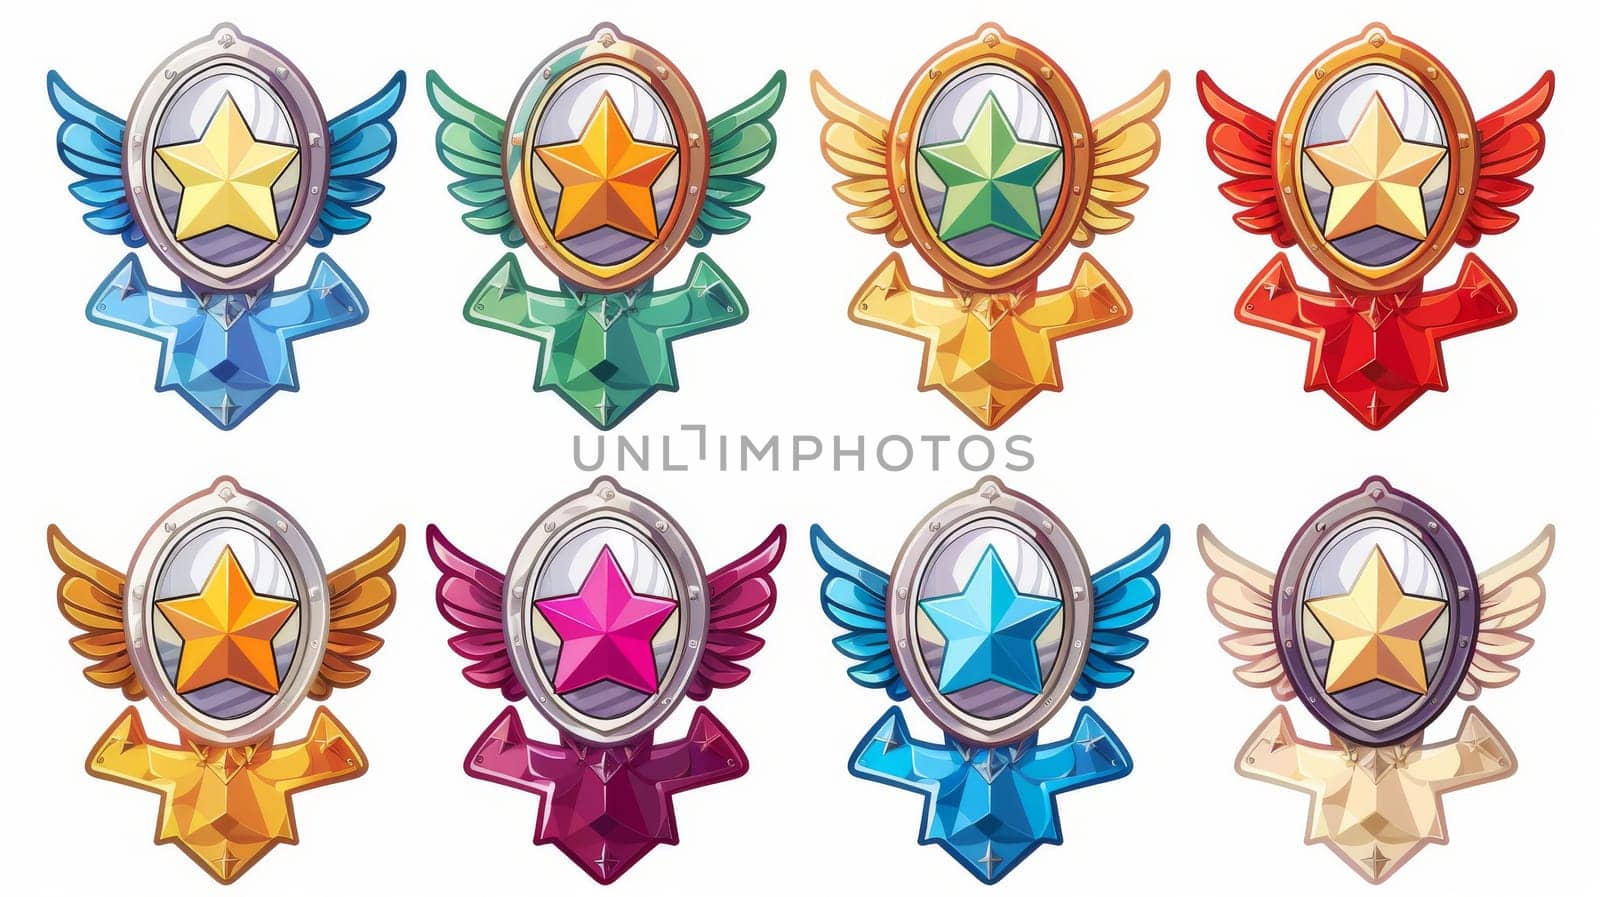 Set of military game ranking badges with star insignia. Clipart illustration of award medals with stone, iron, silver, gold textures and cracks. Level achievement icons with wings.